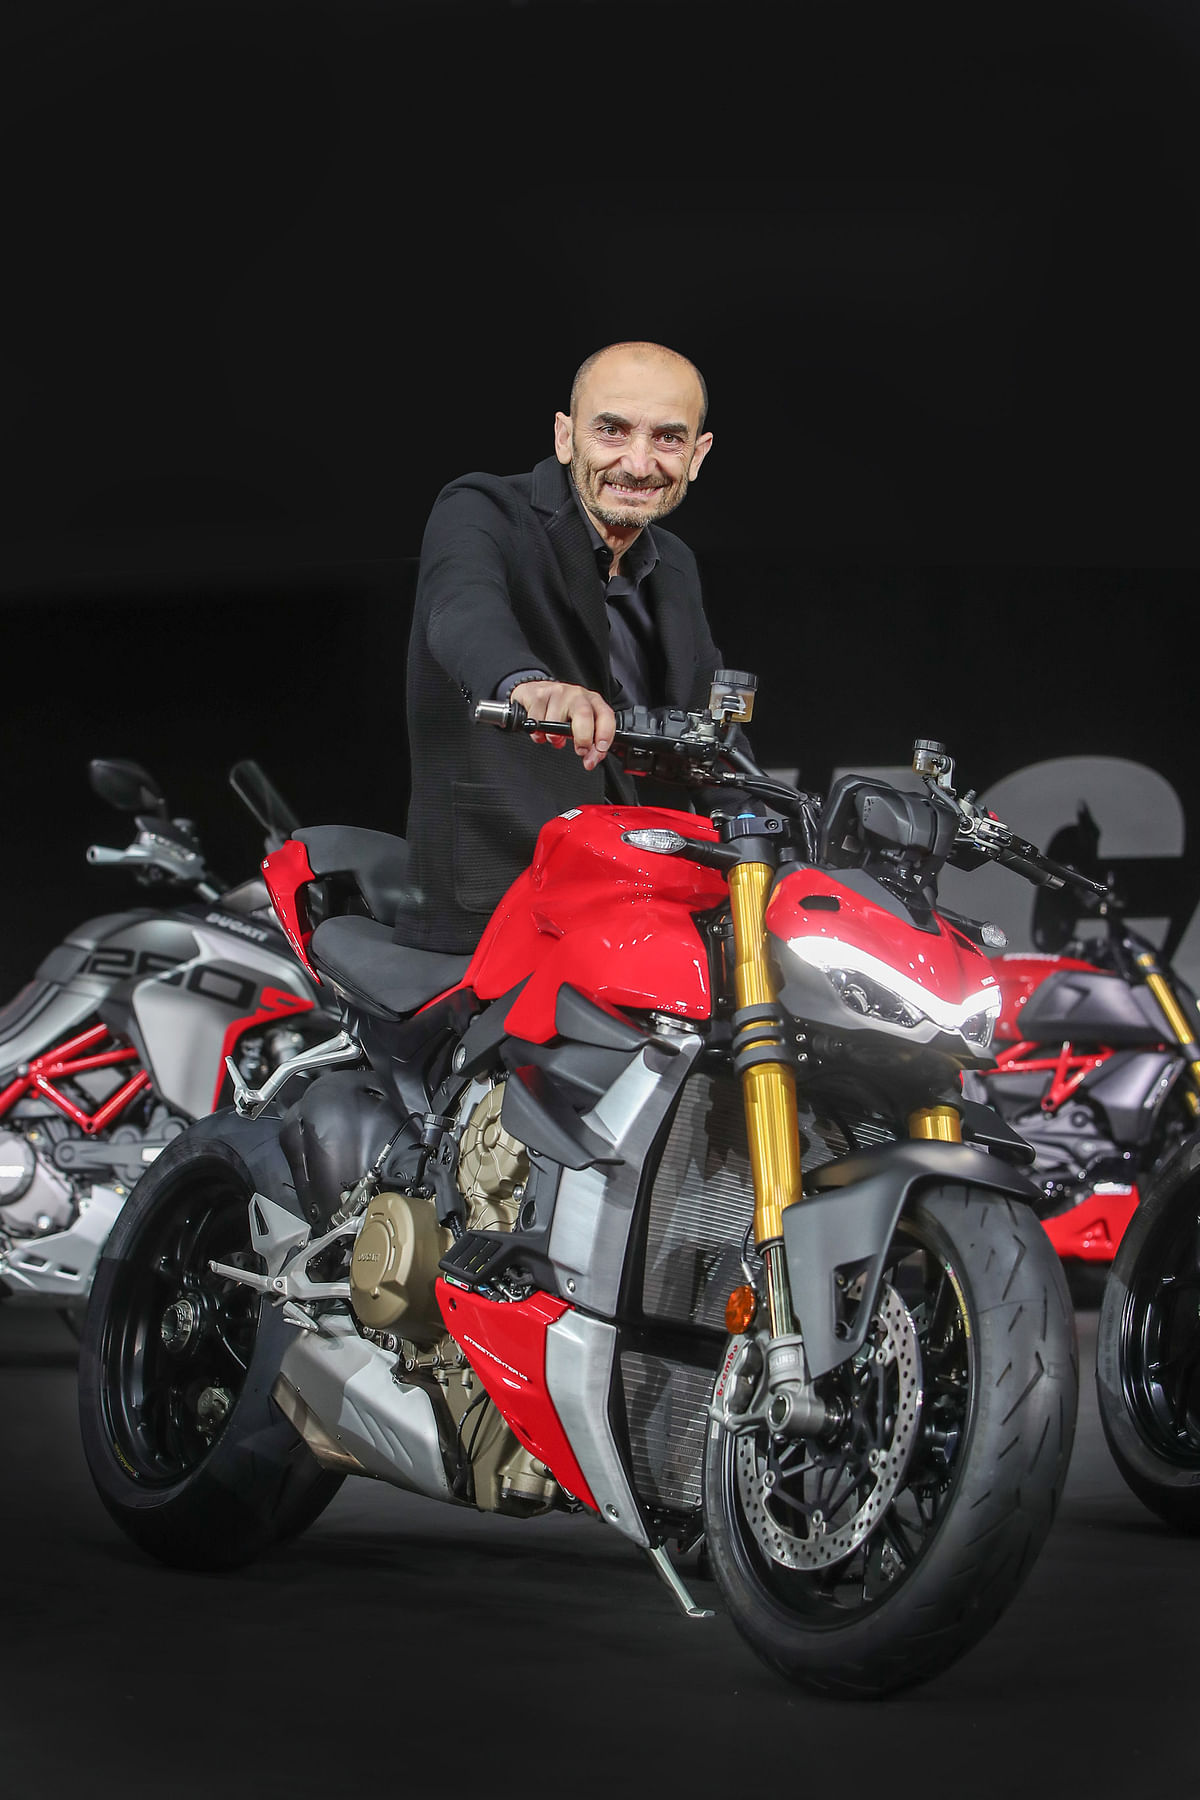 Ducati has also launched its new lineup of electric cycles at the event.